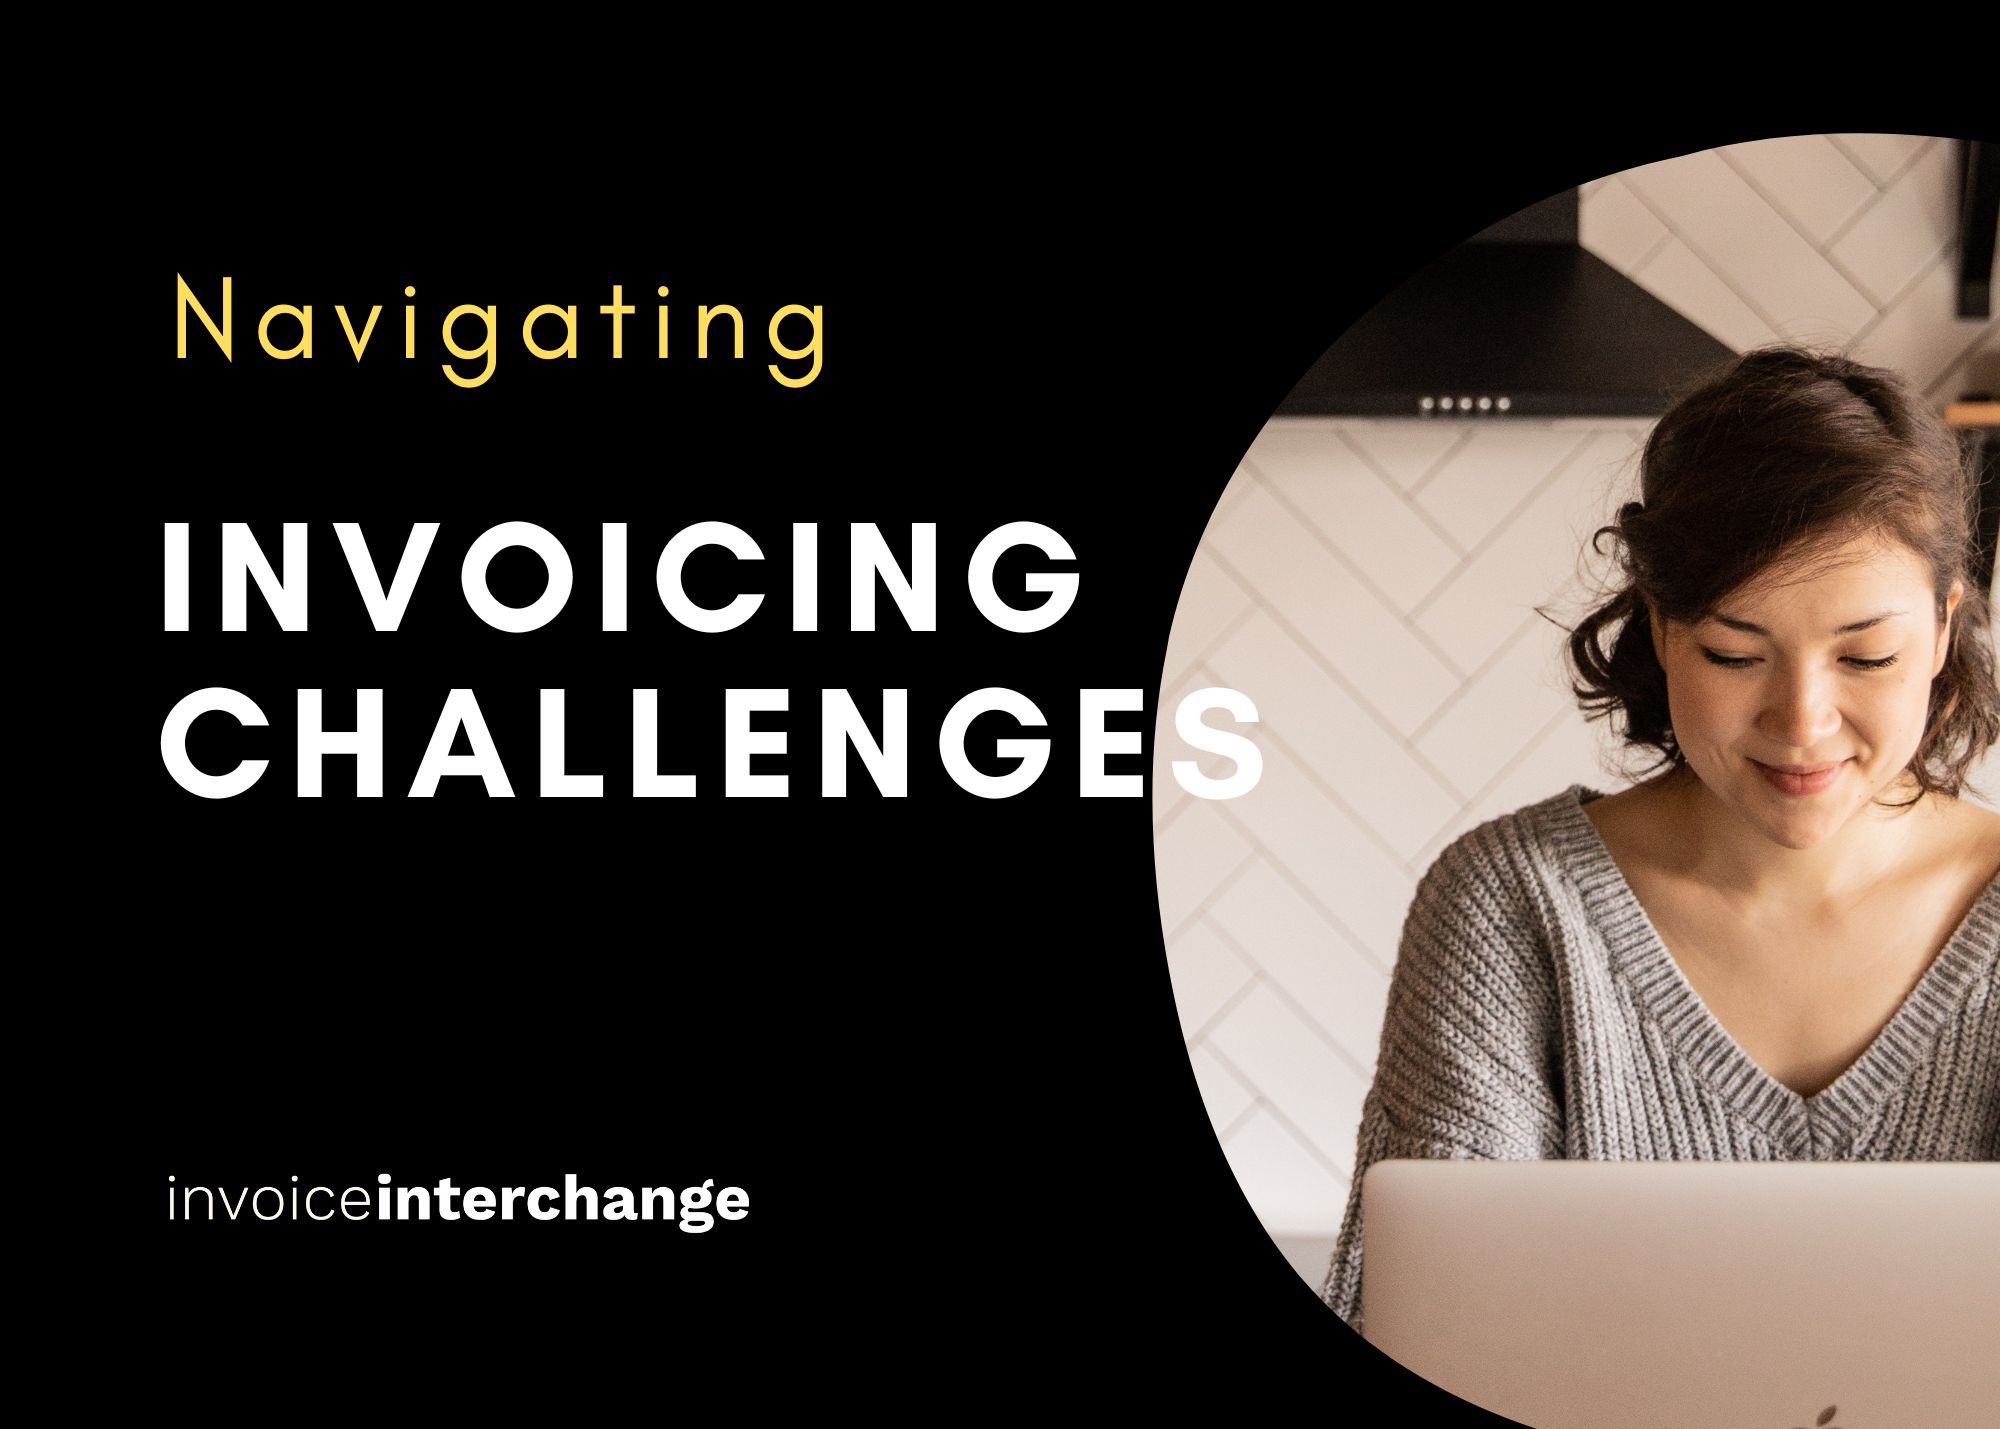 Navigating Invoicing Challenges: Smart Solutions for Small and Medium Enterprises (SMEs)